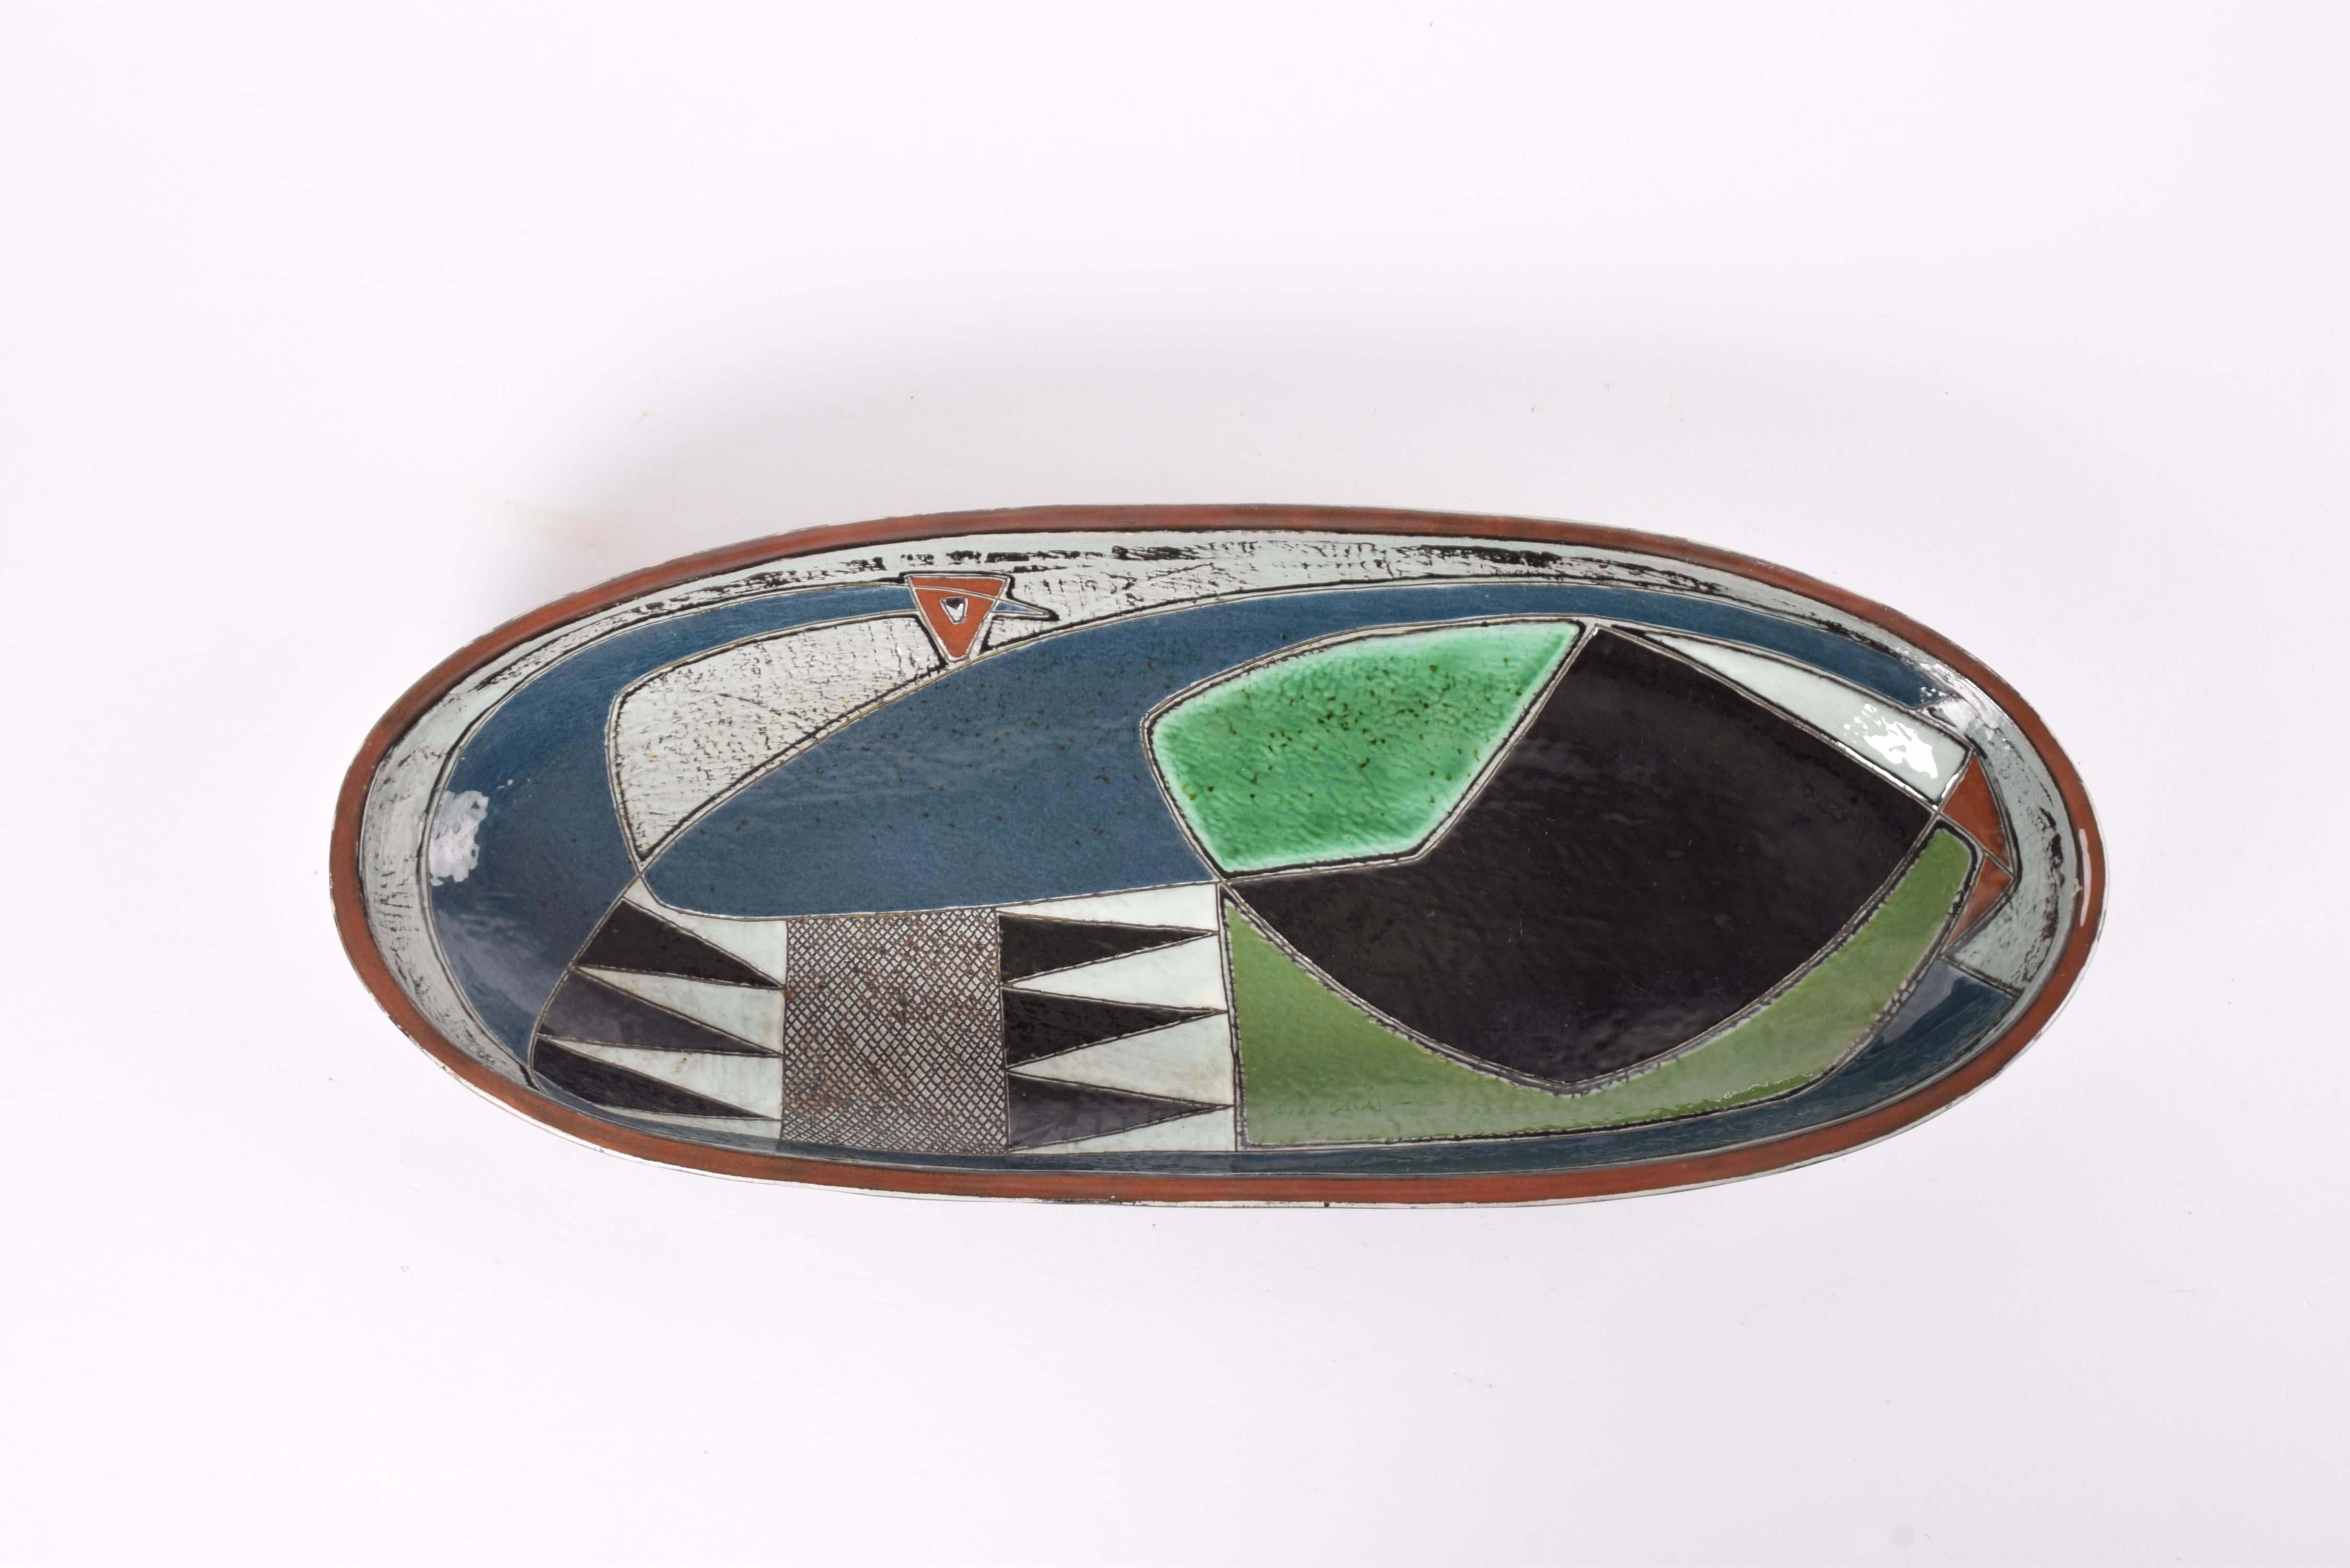 Huge oblong low bowl from Kähler´s ceramic workshop in Denmark. Made ca 1950s.

The shape of the bowl was designed and made by Nils Kähler and the hanpainted decoration is by artist Gete Petersen.

The decor shows a large stylised bird and it's